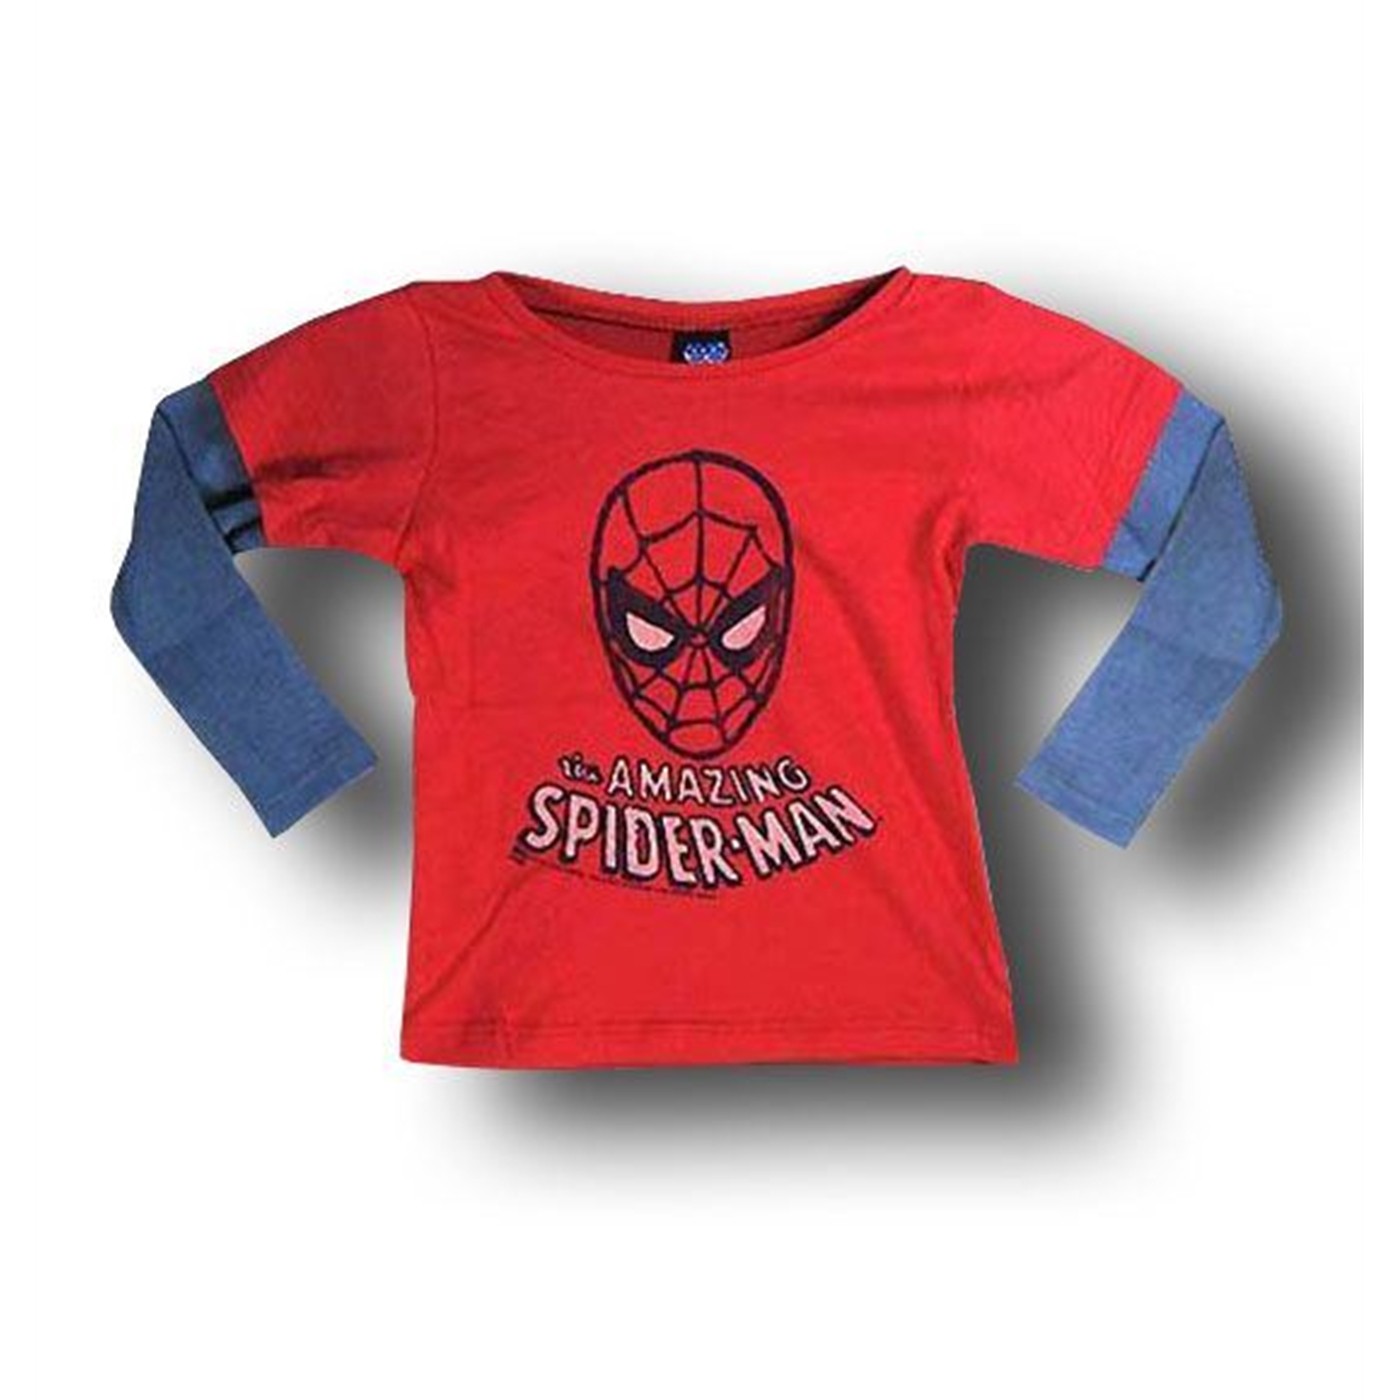 Spiderman Kids/ Infants Double Shirt by Junkfood